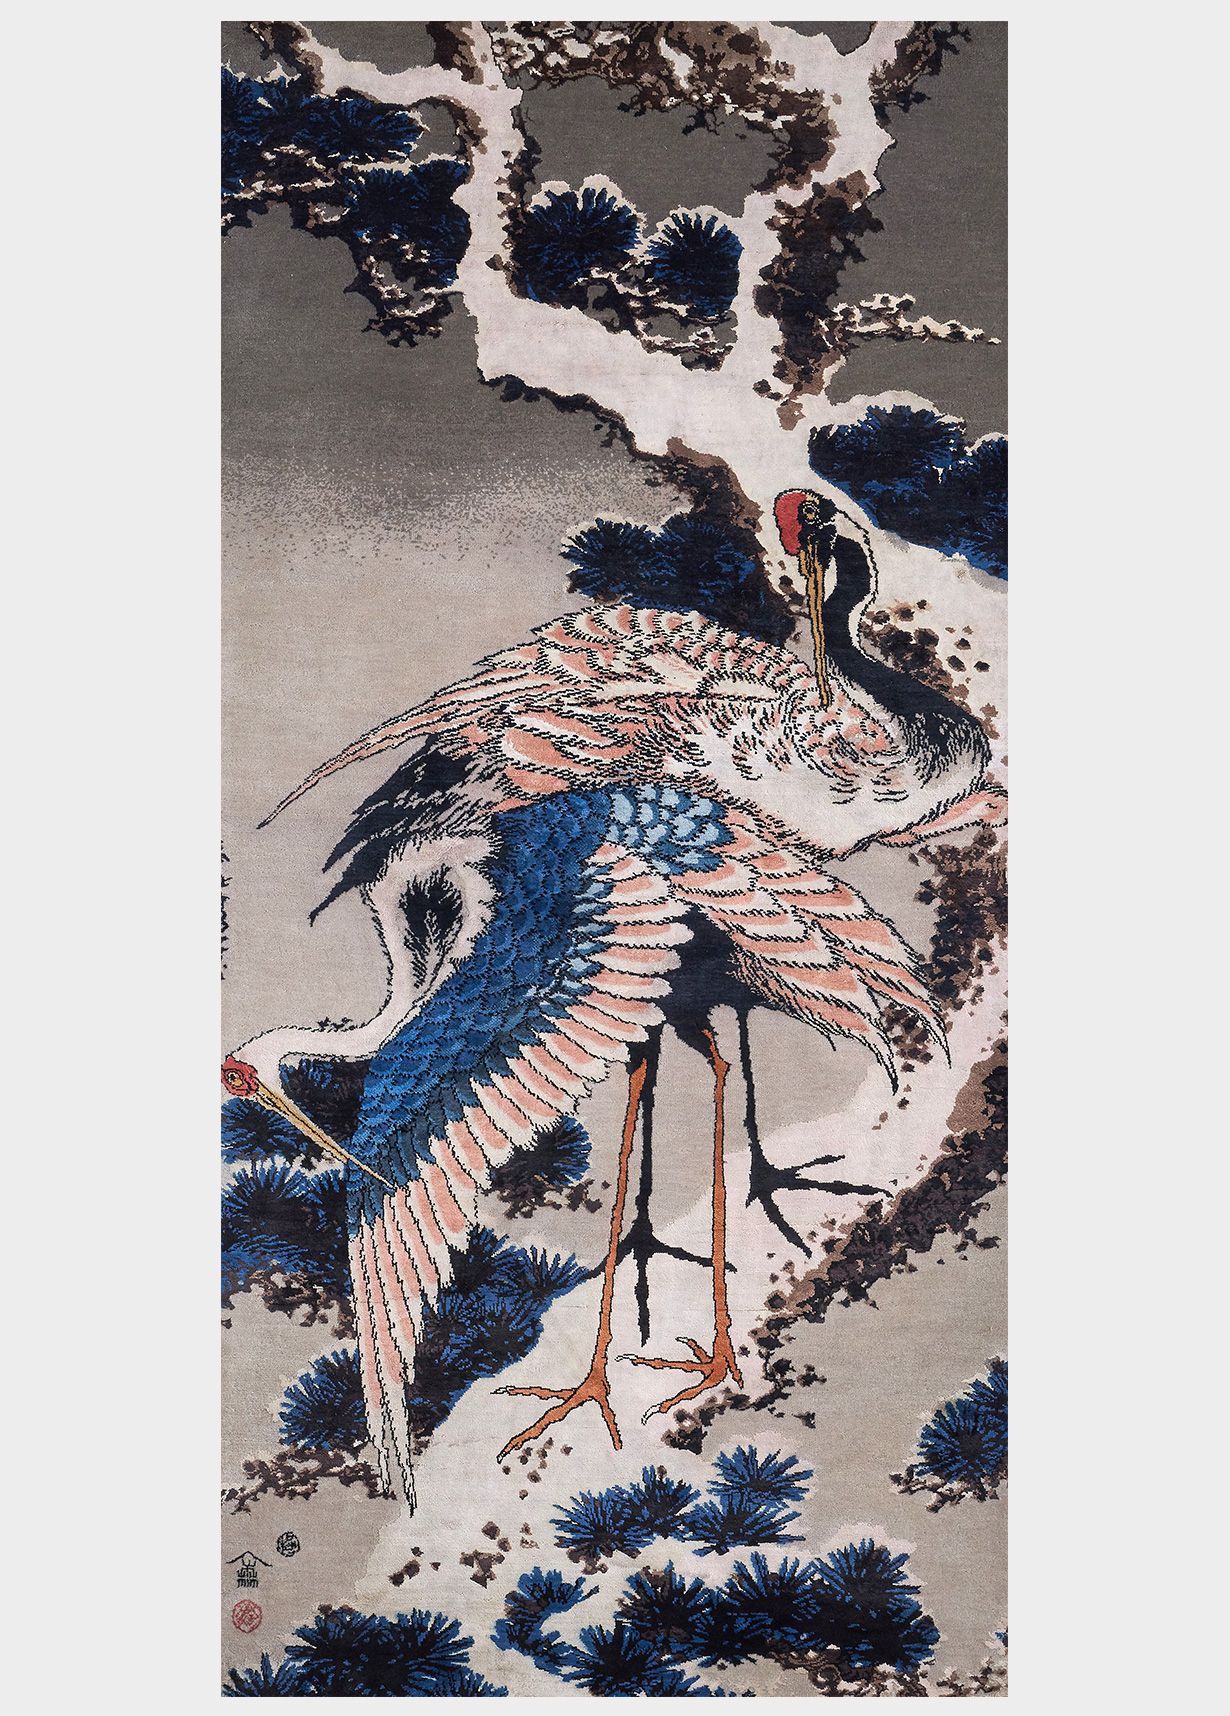 Cranes on a Snowy Pine from the British Museum Collection